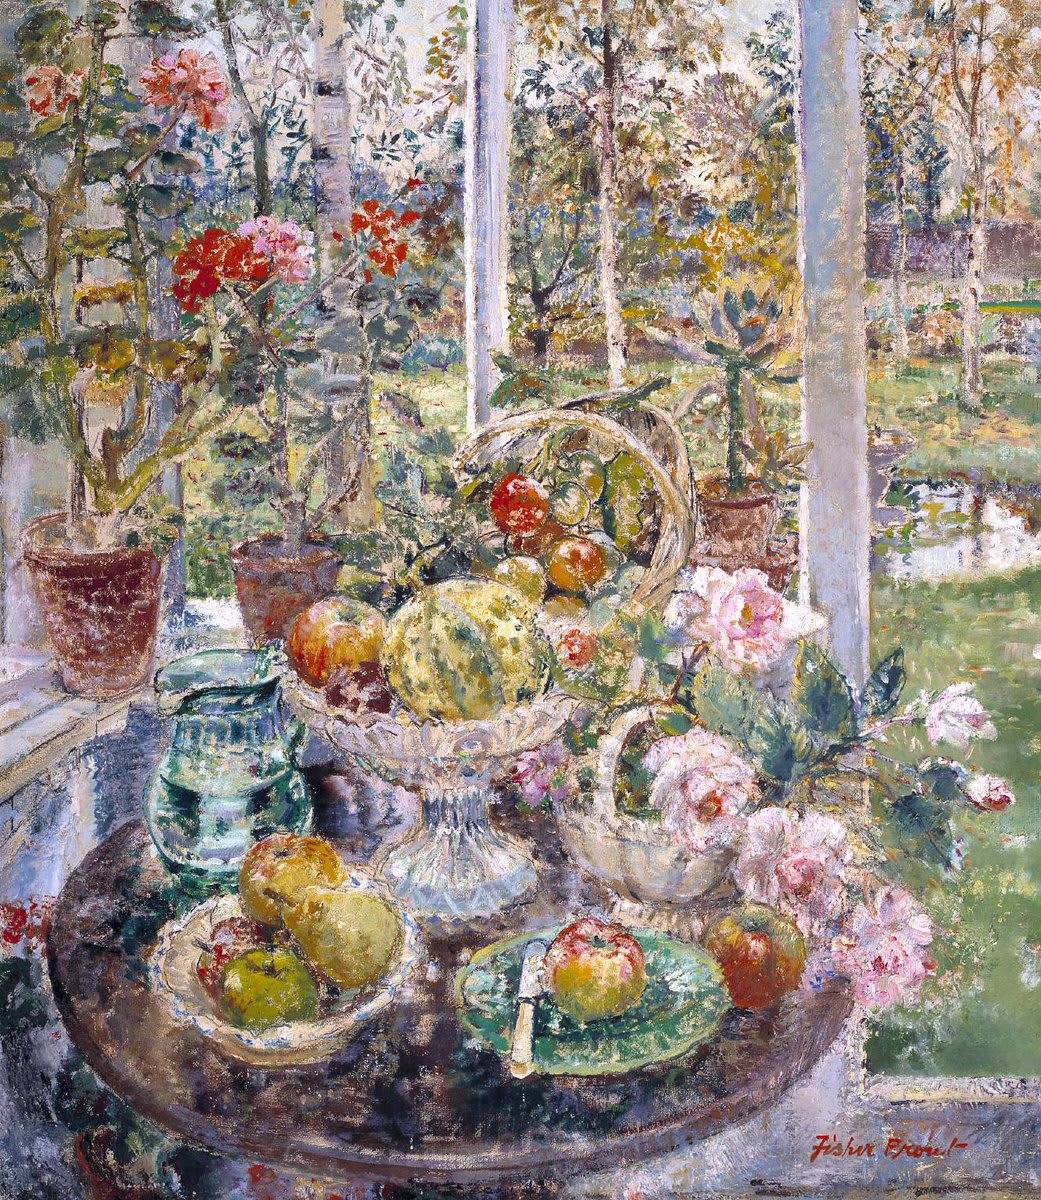 Spring is still life season. 🍈🌸🌱🍐🌷 Margaret Fisher Prout, Home Grown 1952.